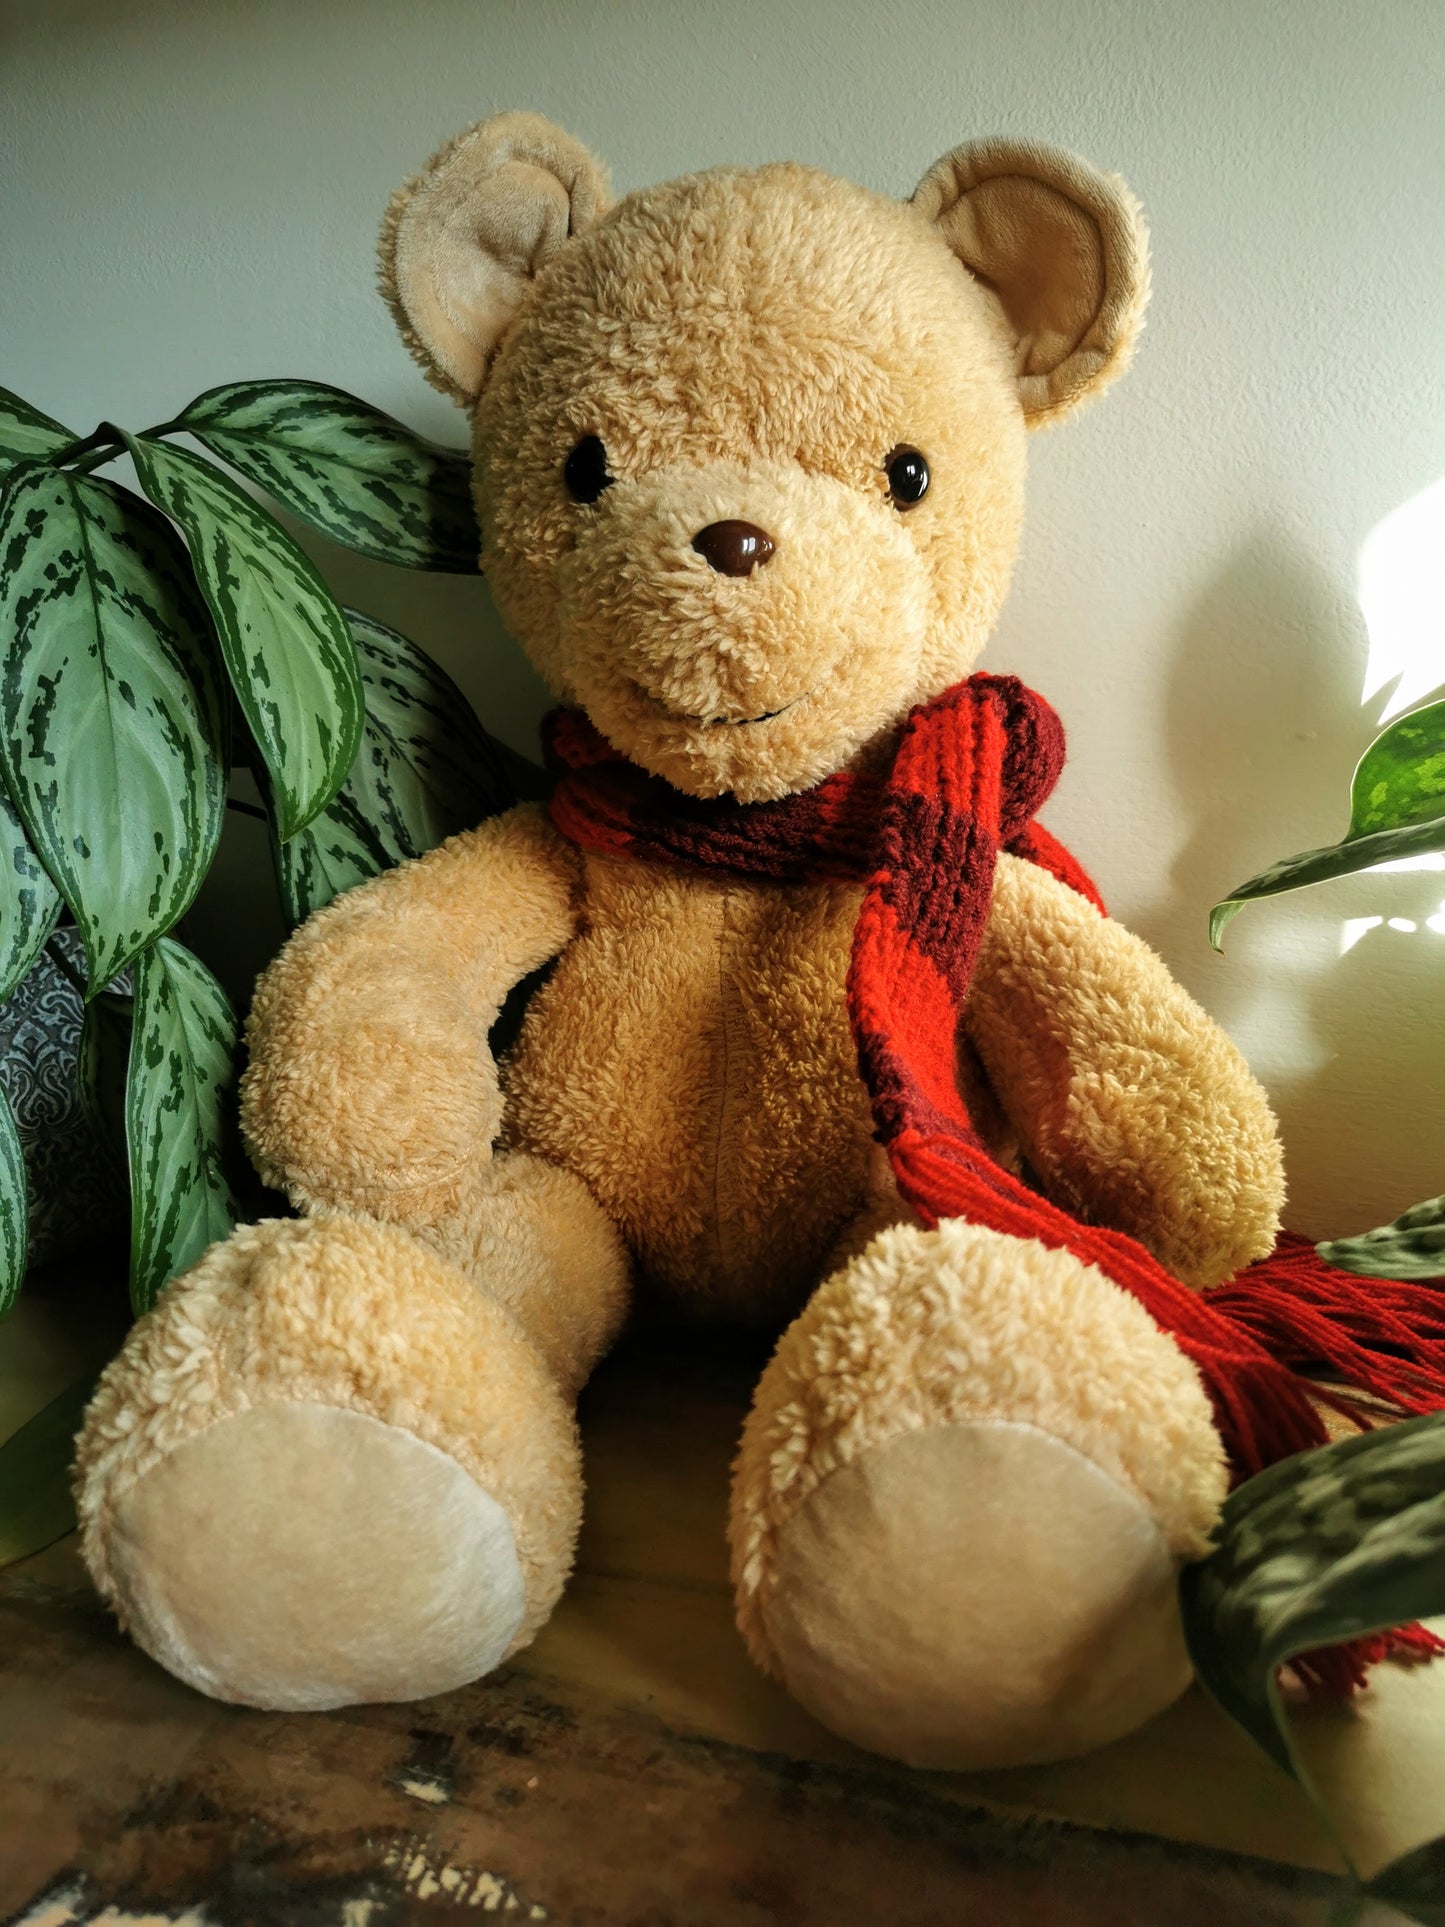 Teddy bear cub with knitted red scarf, plush teddy with weighted beads, toddler teddy bear 55 cm